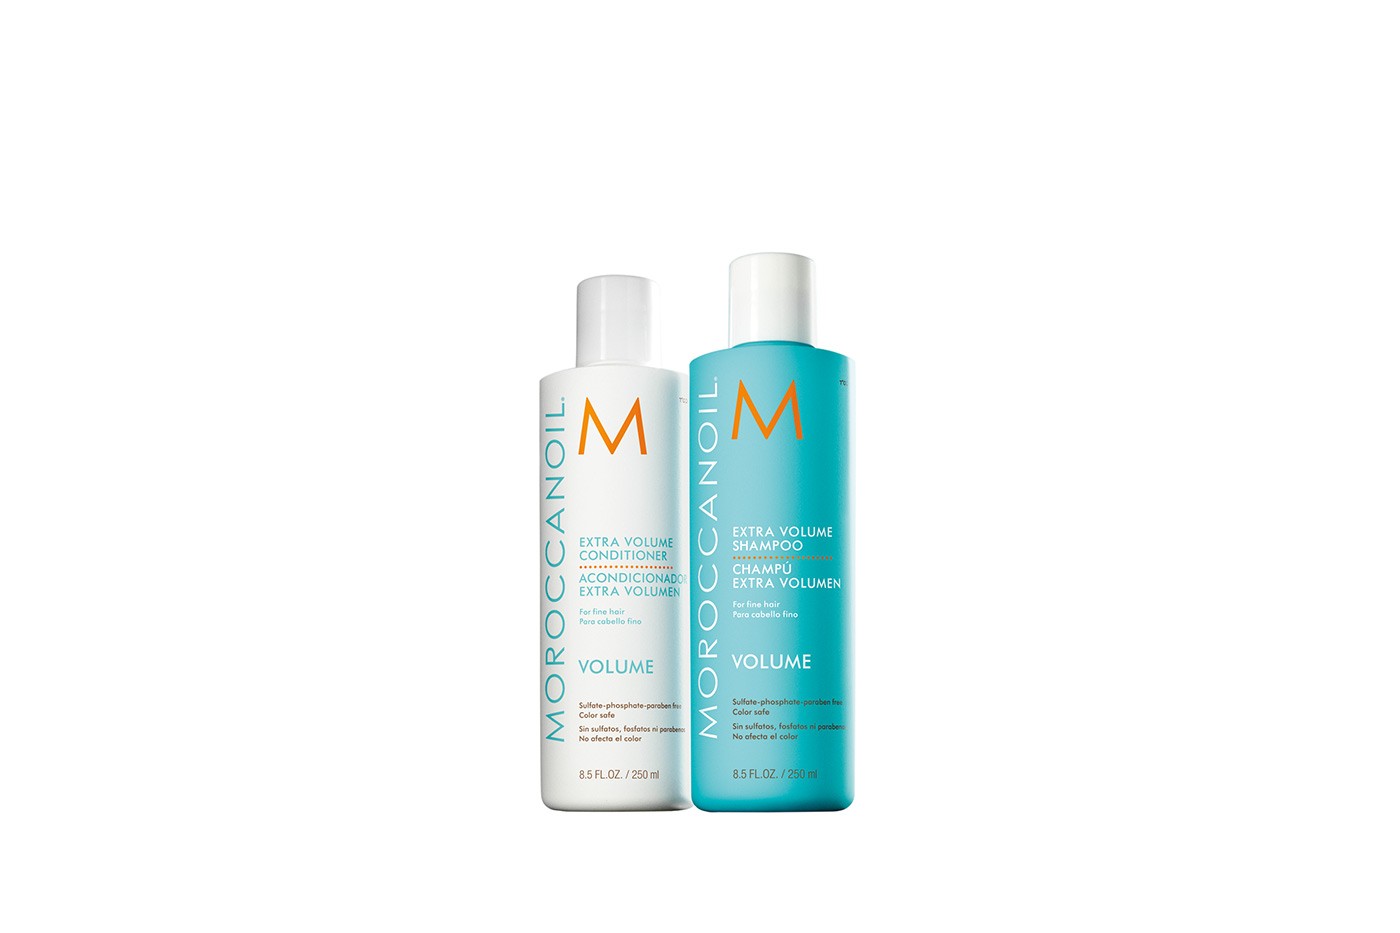 Get shiny hair with Moroccanoil’s shampoo and conditioner 